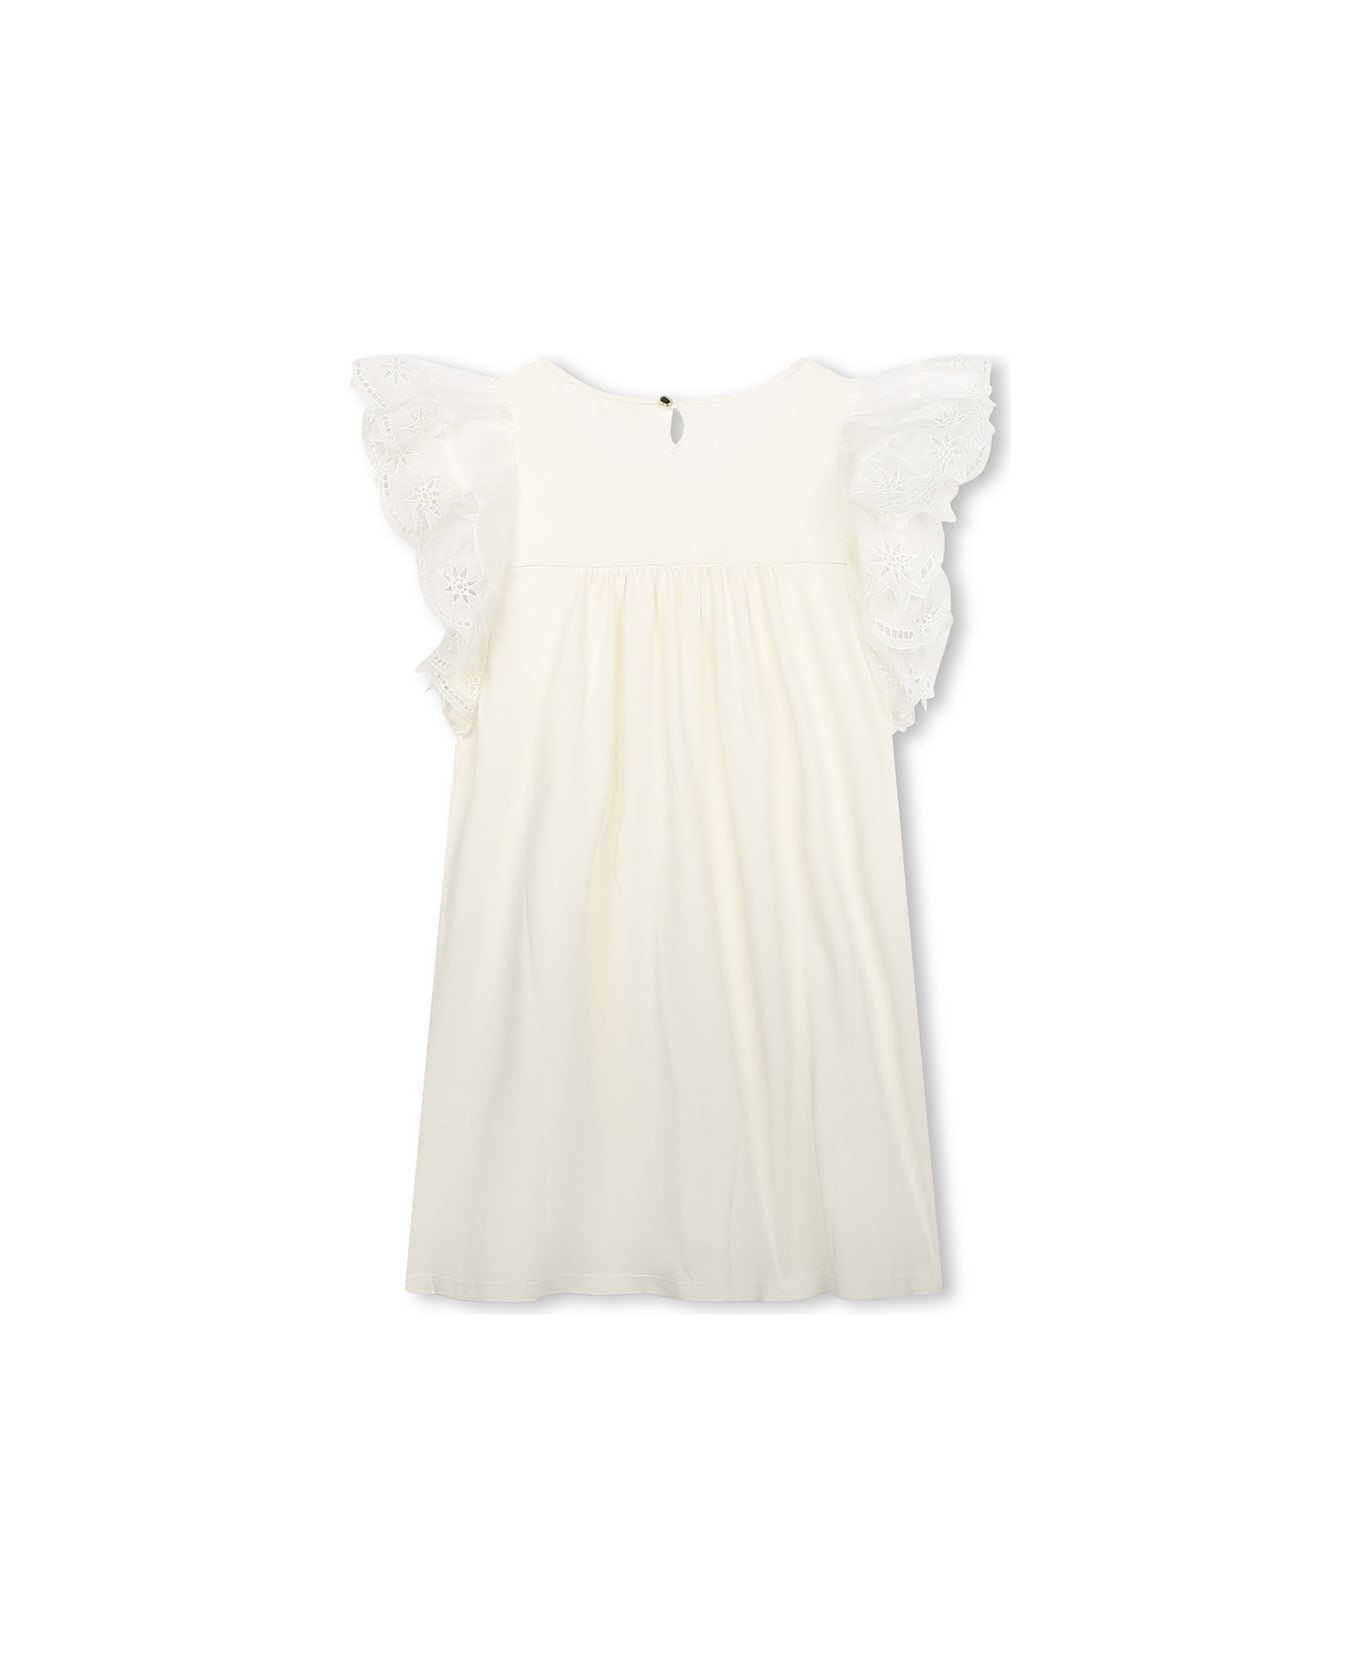 Chloé White Dress With Embroidered Ruffles - White ワンピース＆ドレス